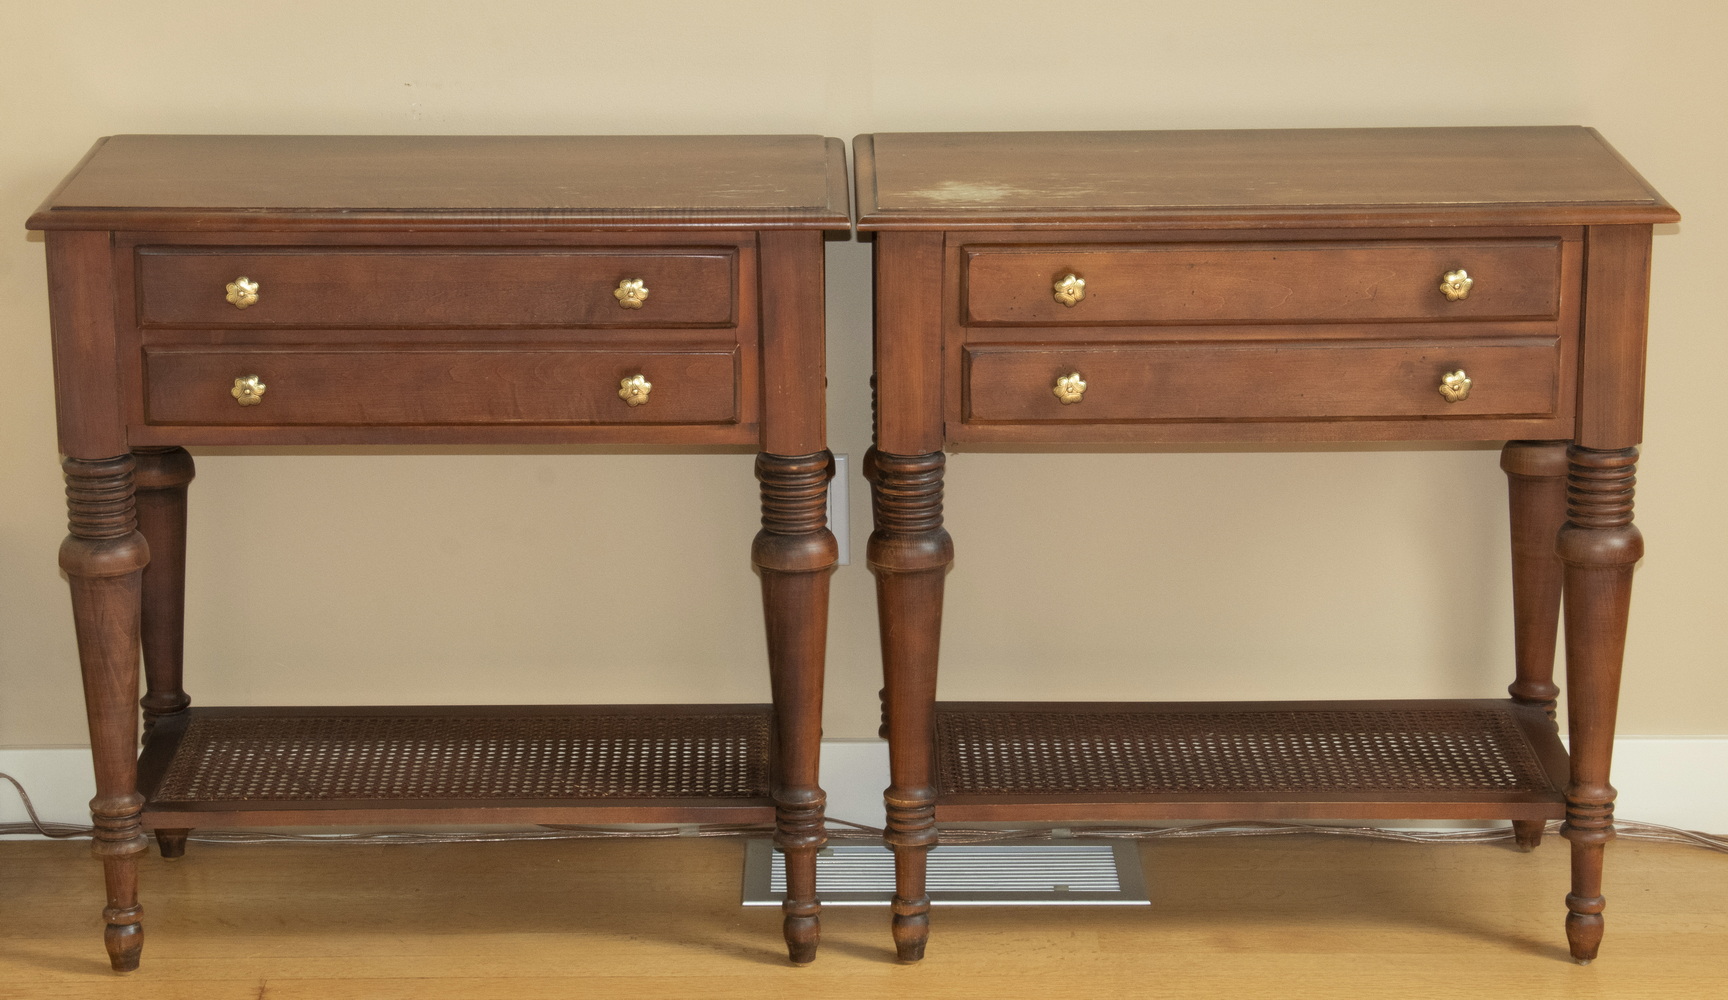 PAIR OF SIDE TABLES WITH CANED 2b3e4c